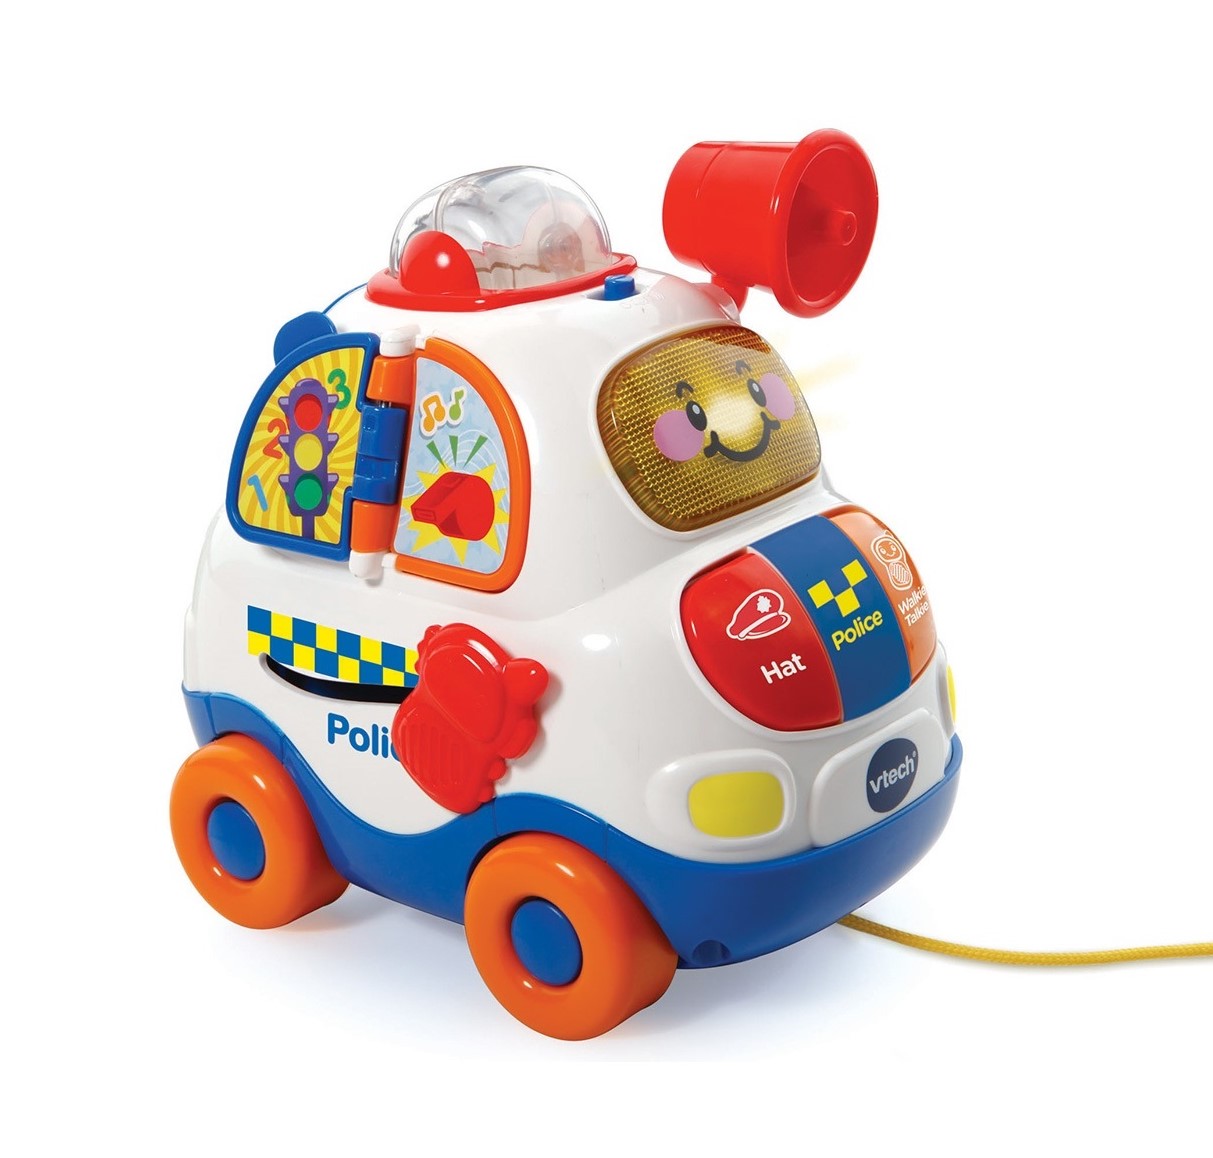 Vtech Toot Toot Drive N Discover Police Car (80-501403)